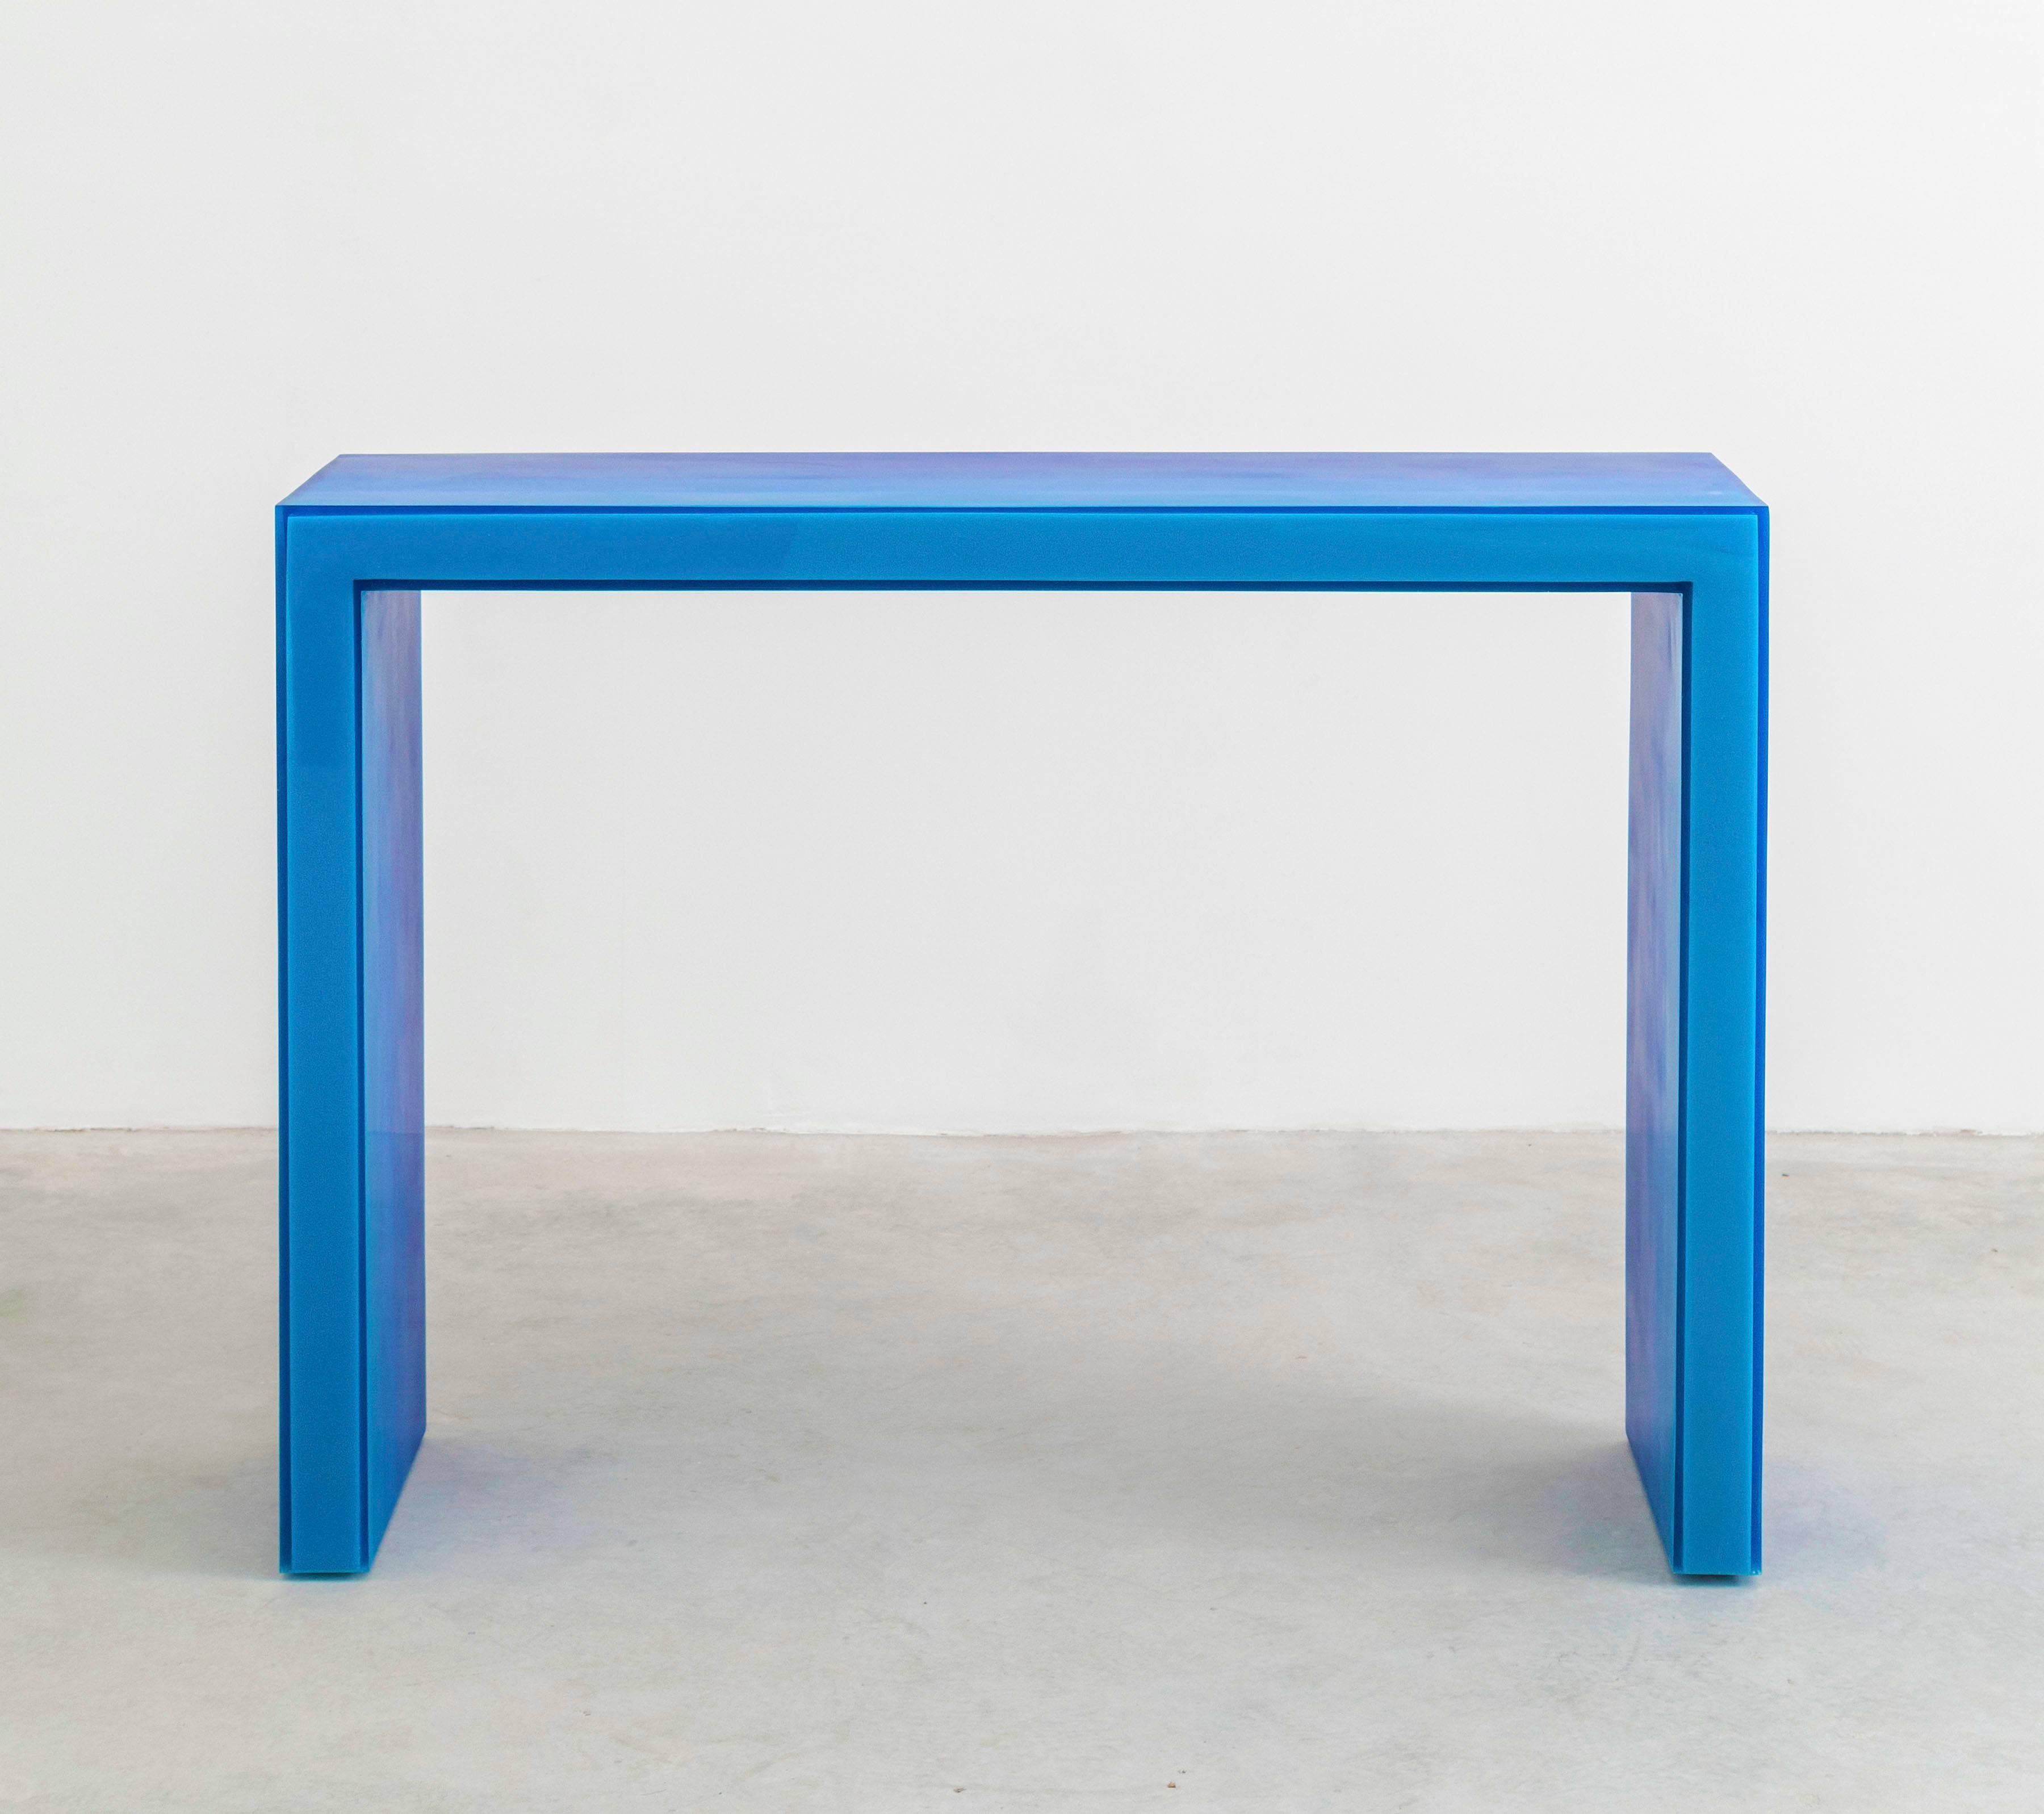 This console uses Facture Studio's gradient style to transition in six layers from a deep opaque to water clear blue over a light blue resin core. The interior and exterior facets are sanded to a buttery smooth finish while the front edge is buffed